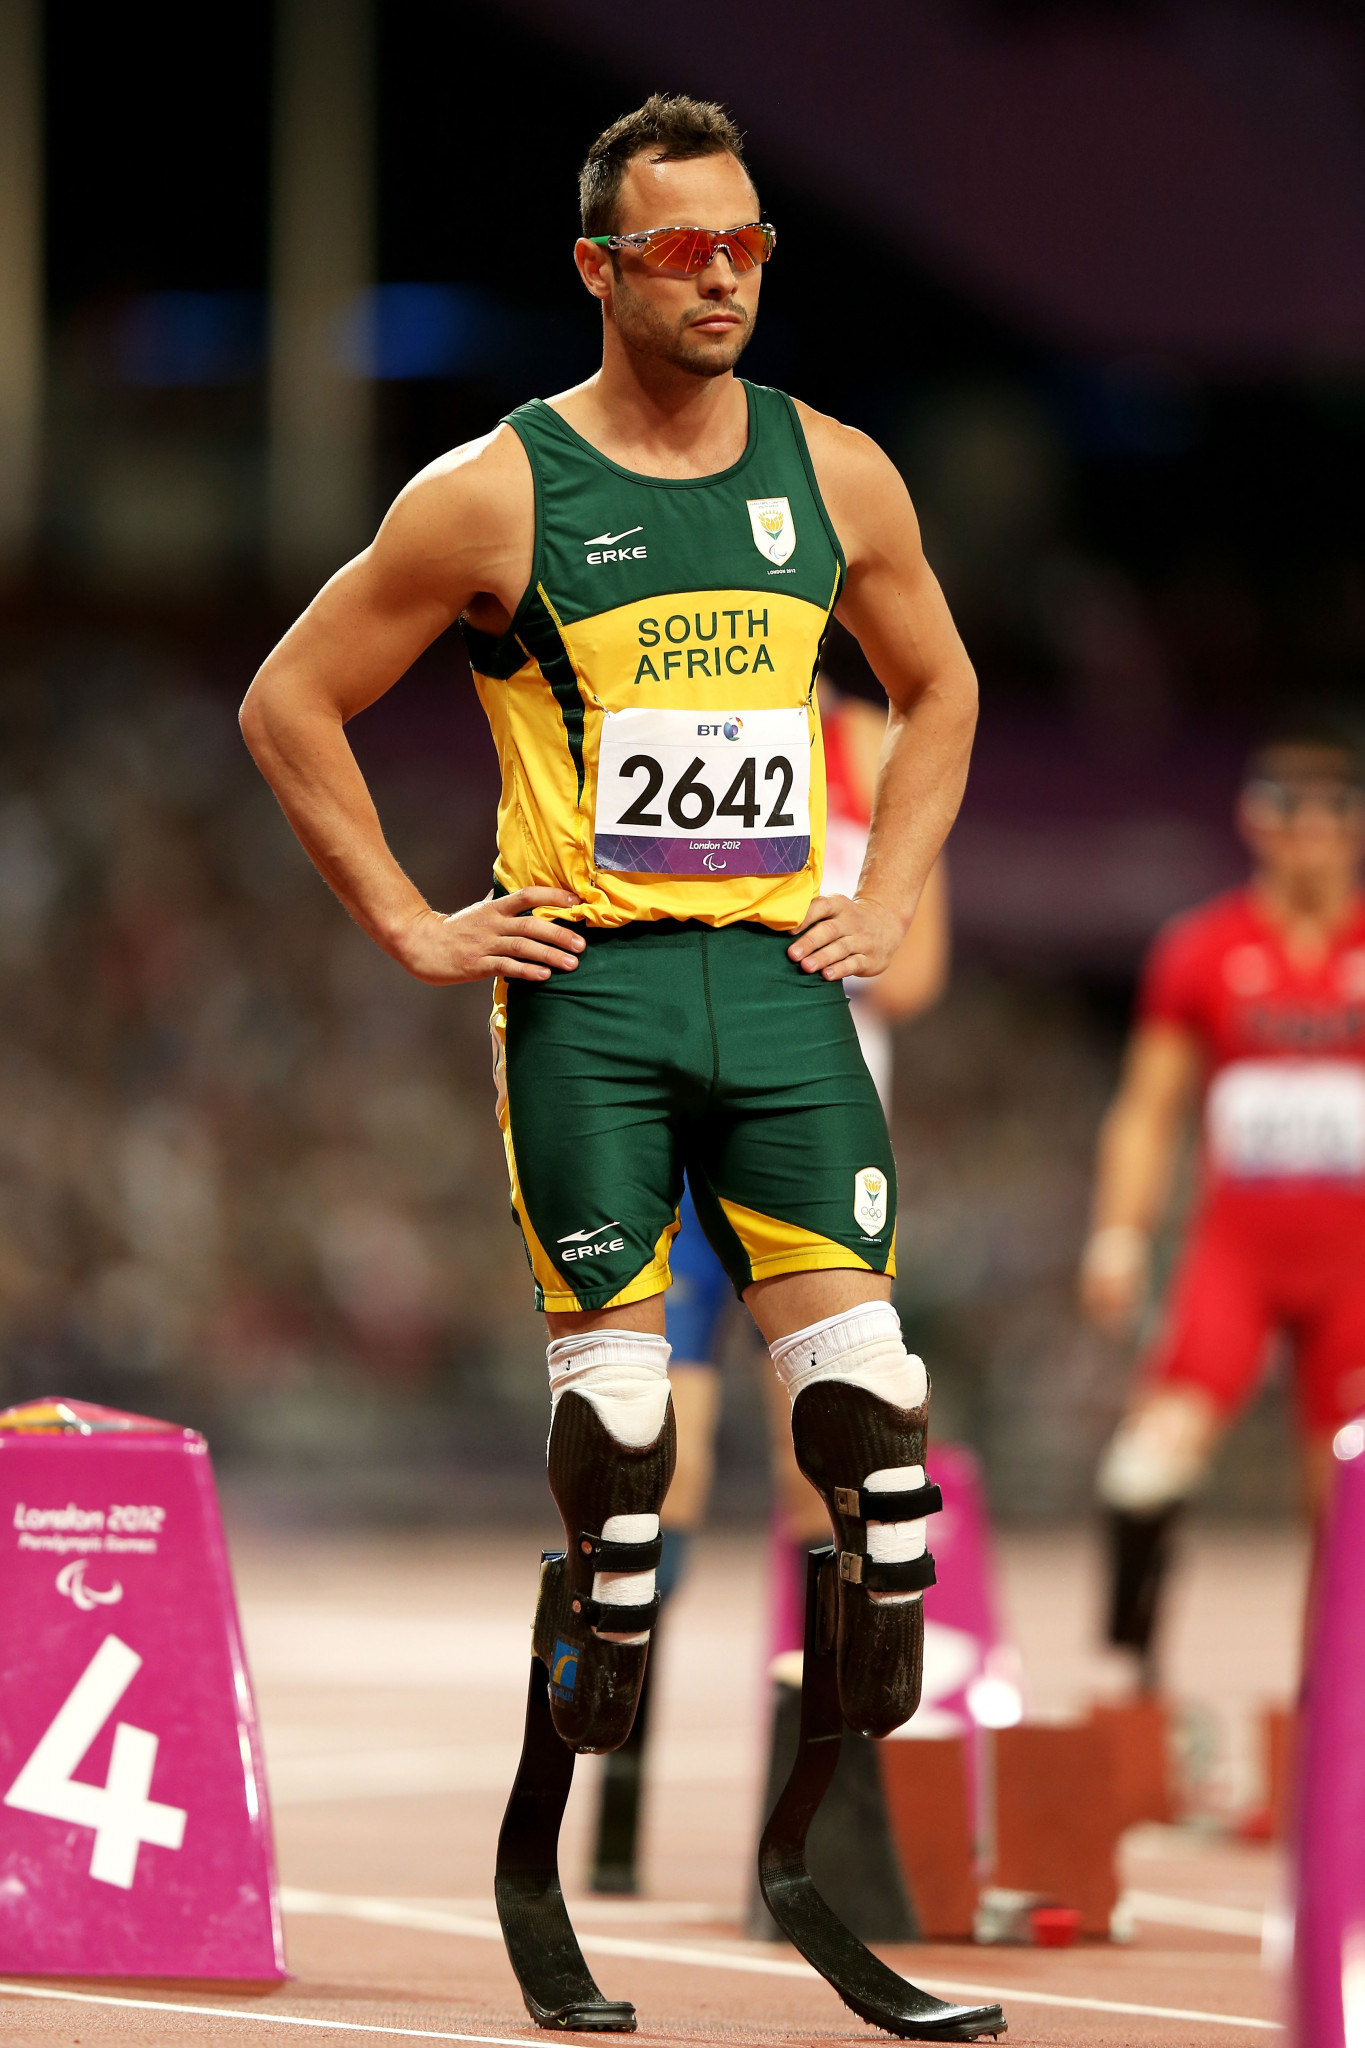 Pistorius made history by becoming the first amputee sprinter to compete at the Olympics, in 2012 in London ©Getty Images